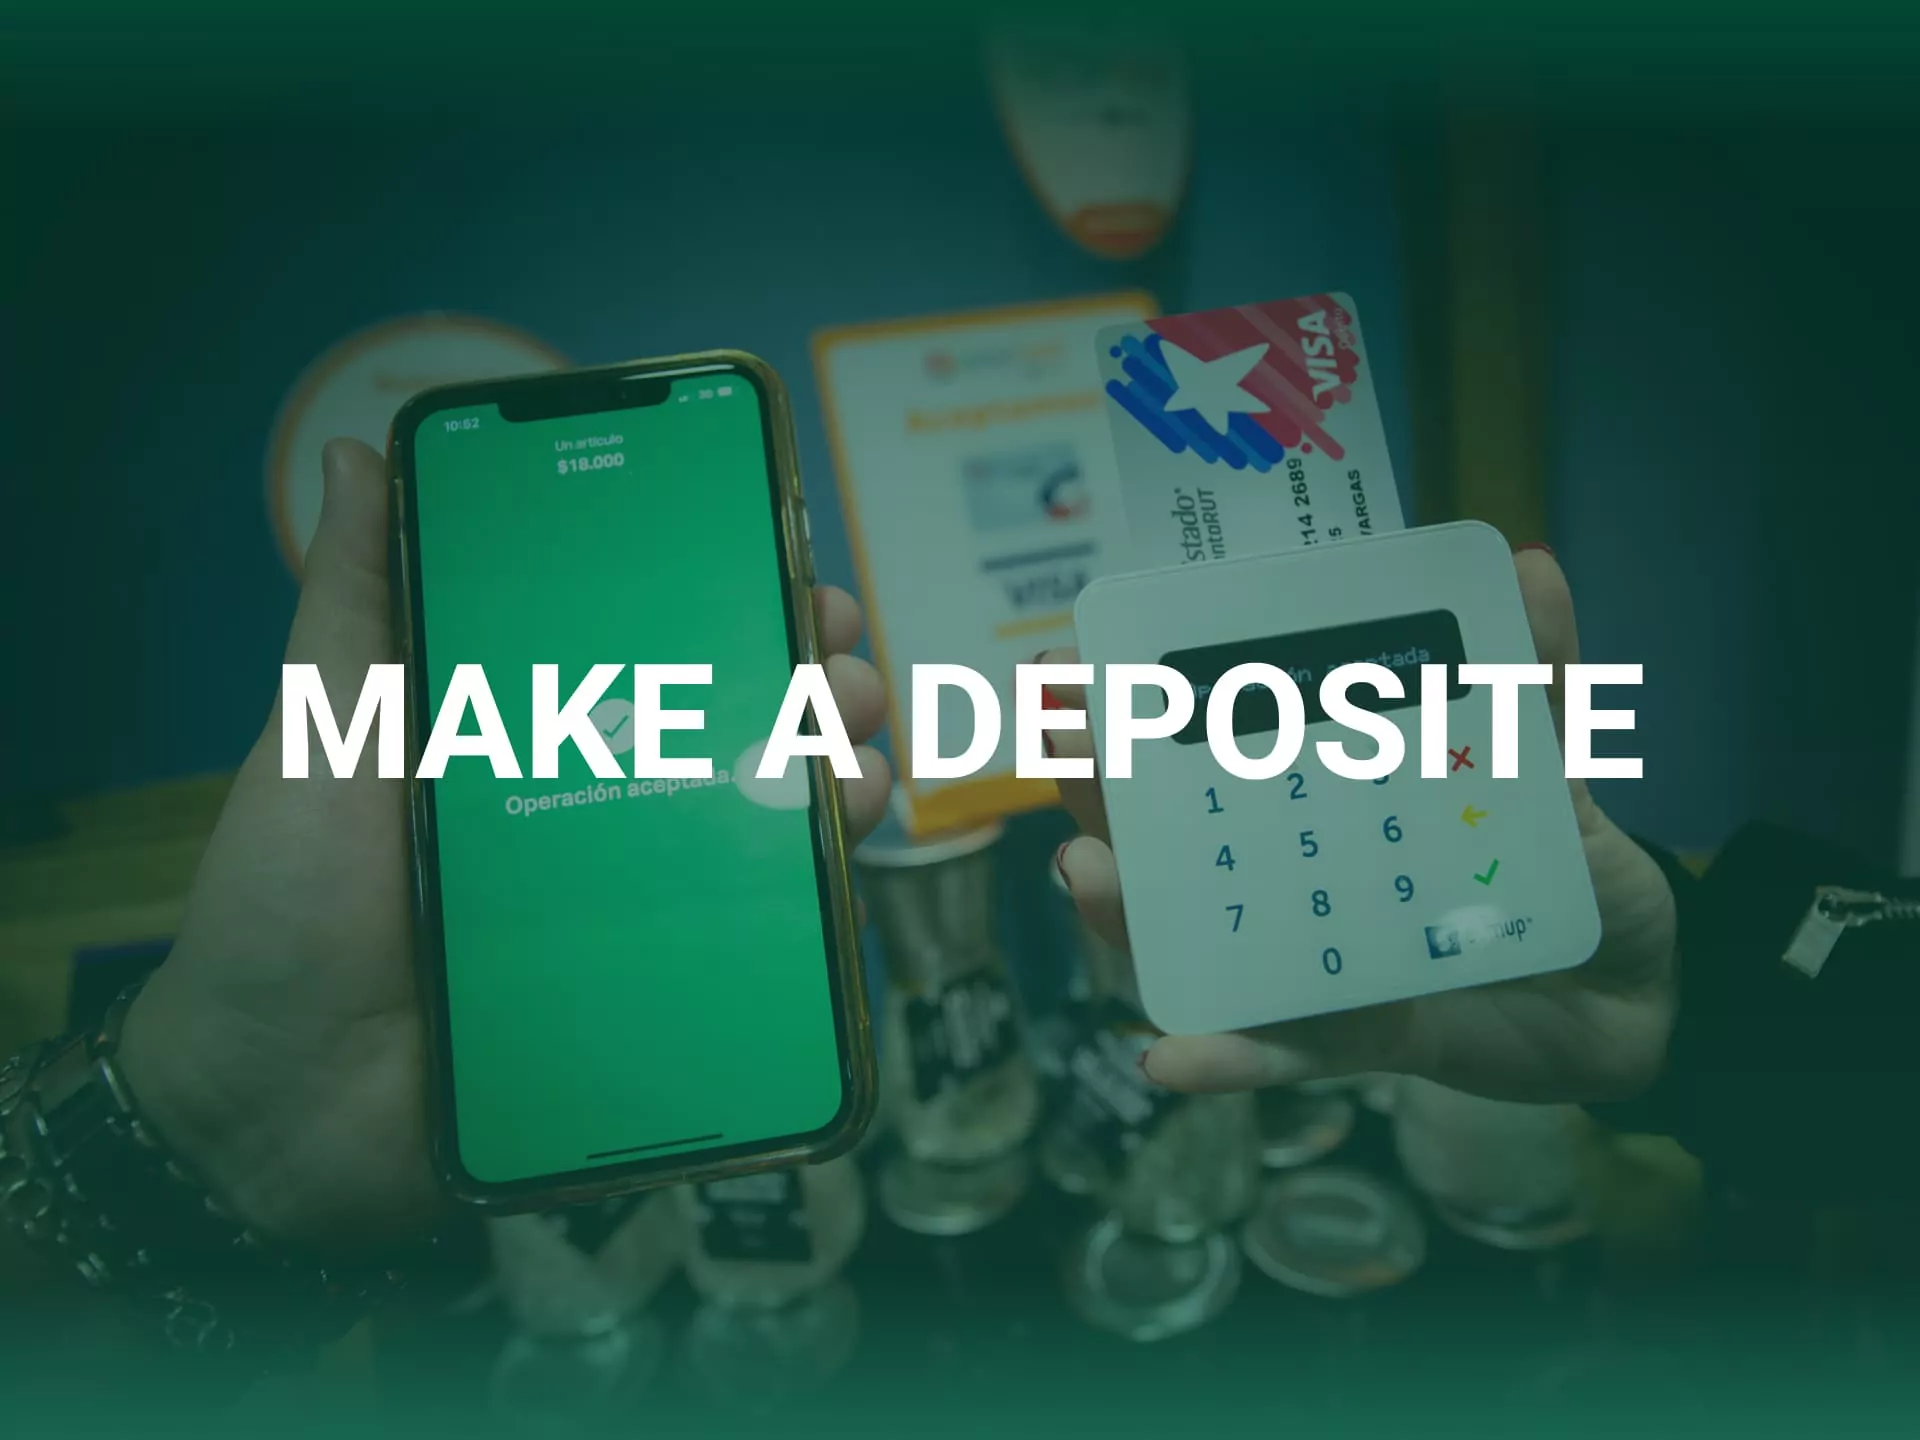 Instructions for making a deposit at kabaddi betting sites.